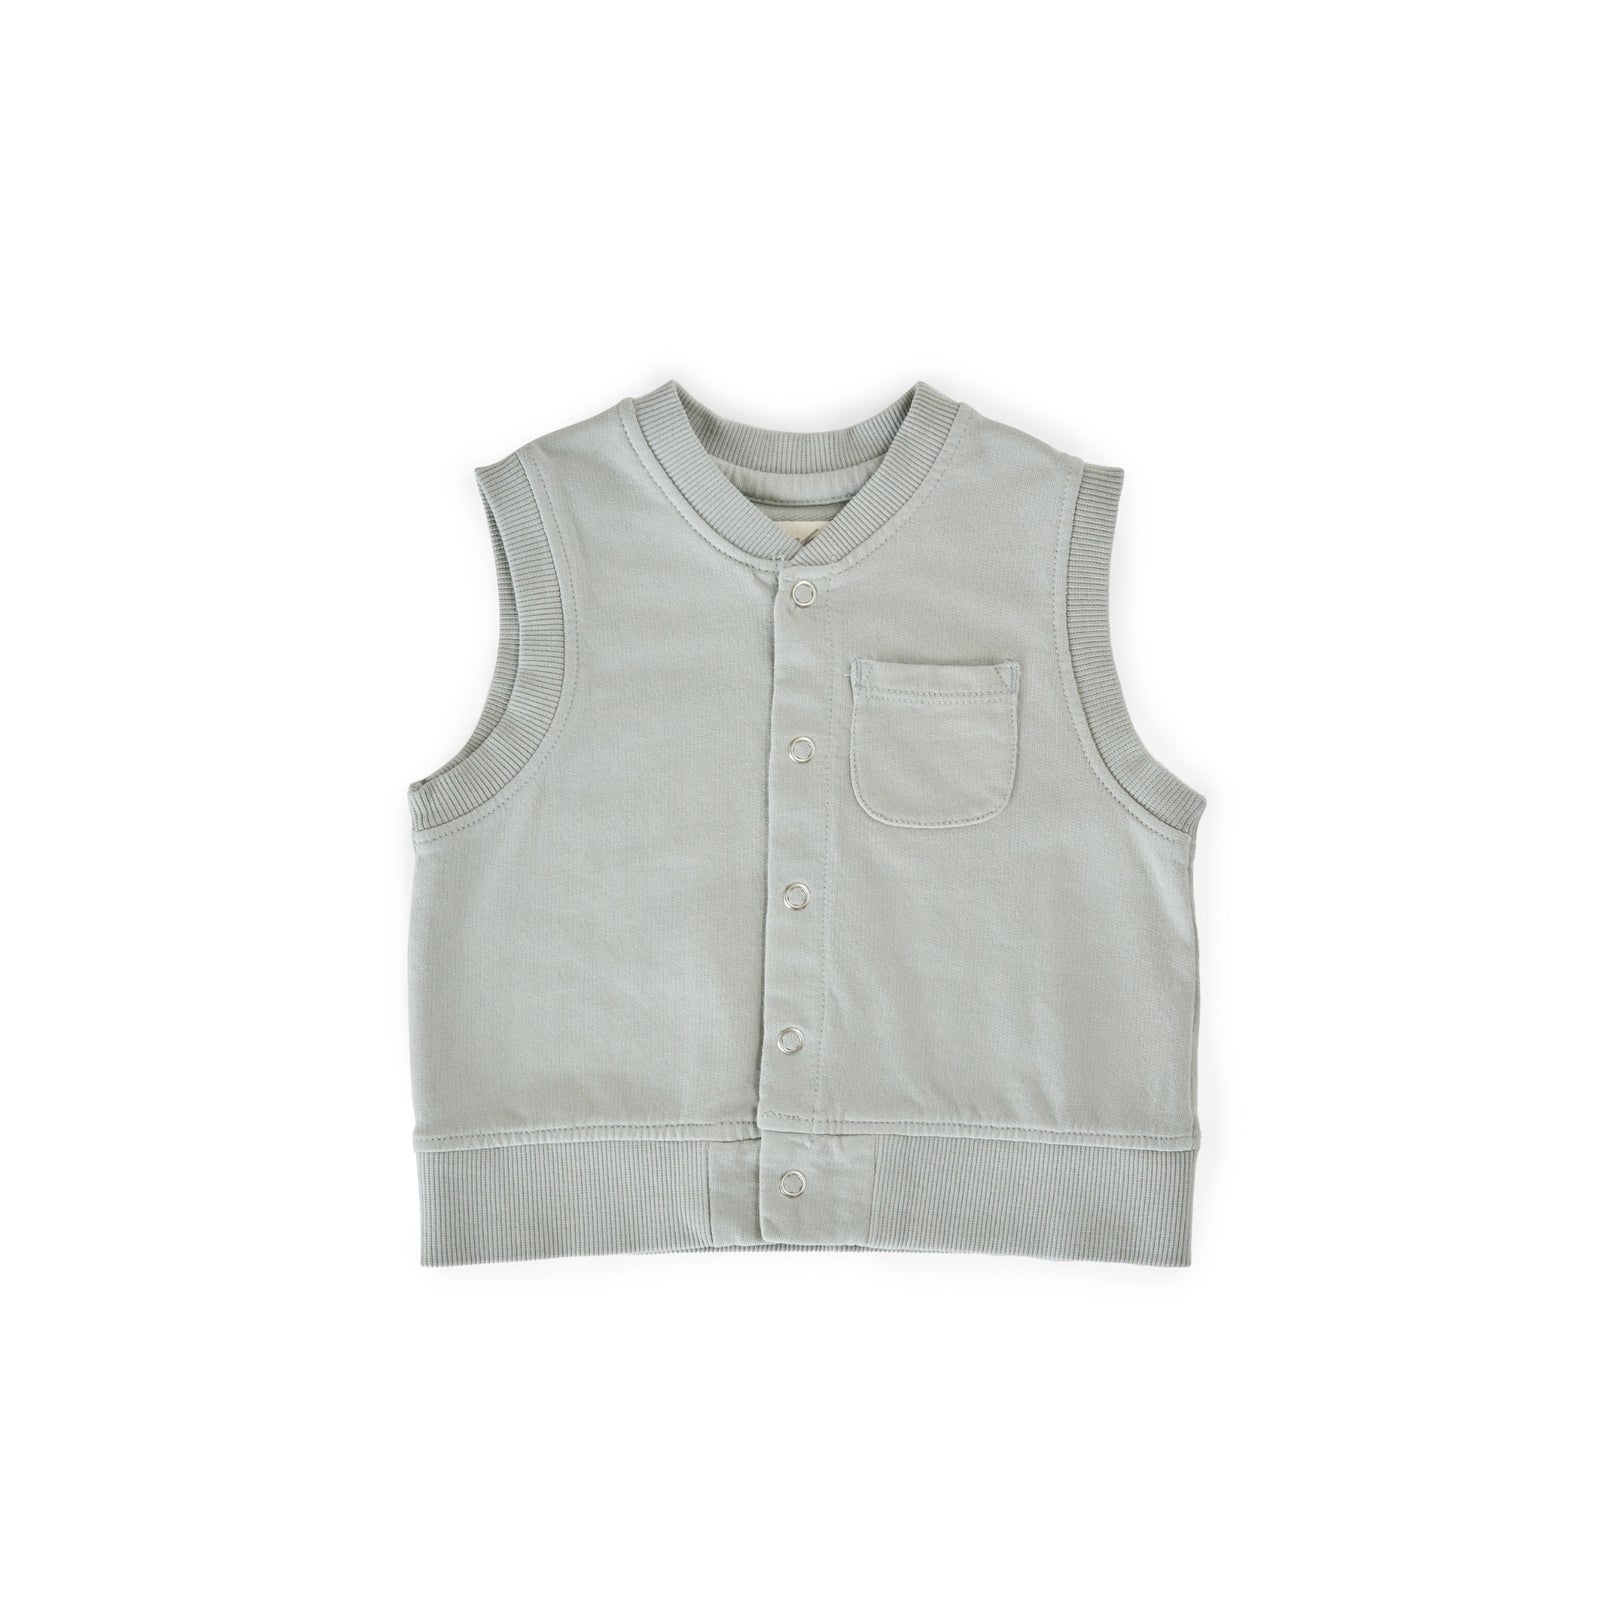 French Terry Patch Pocket Vest Top Pehr Canada Soft Sea 0 - 6 mos. 